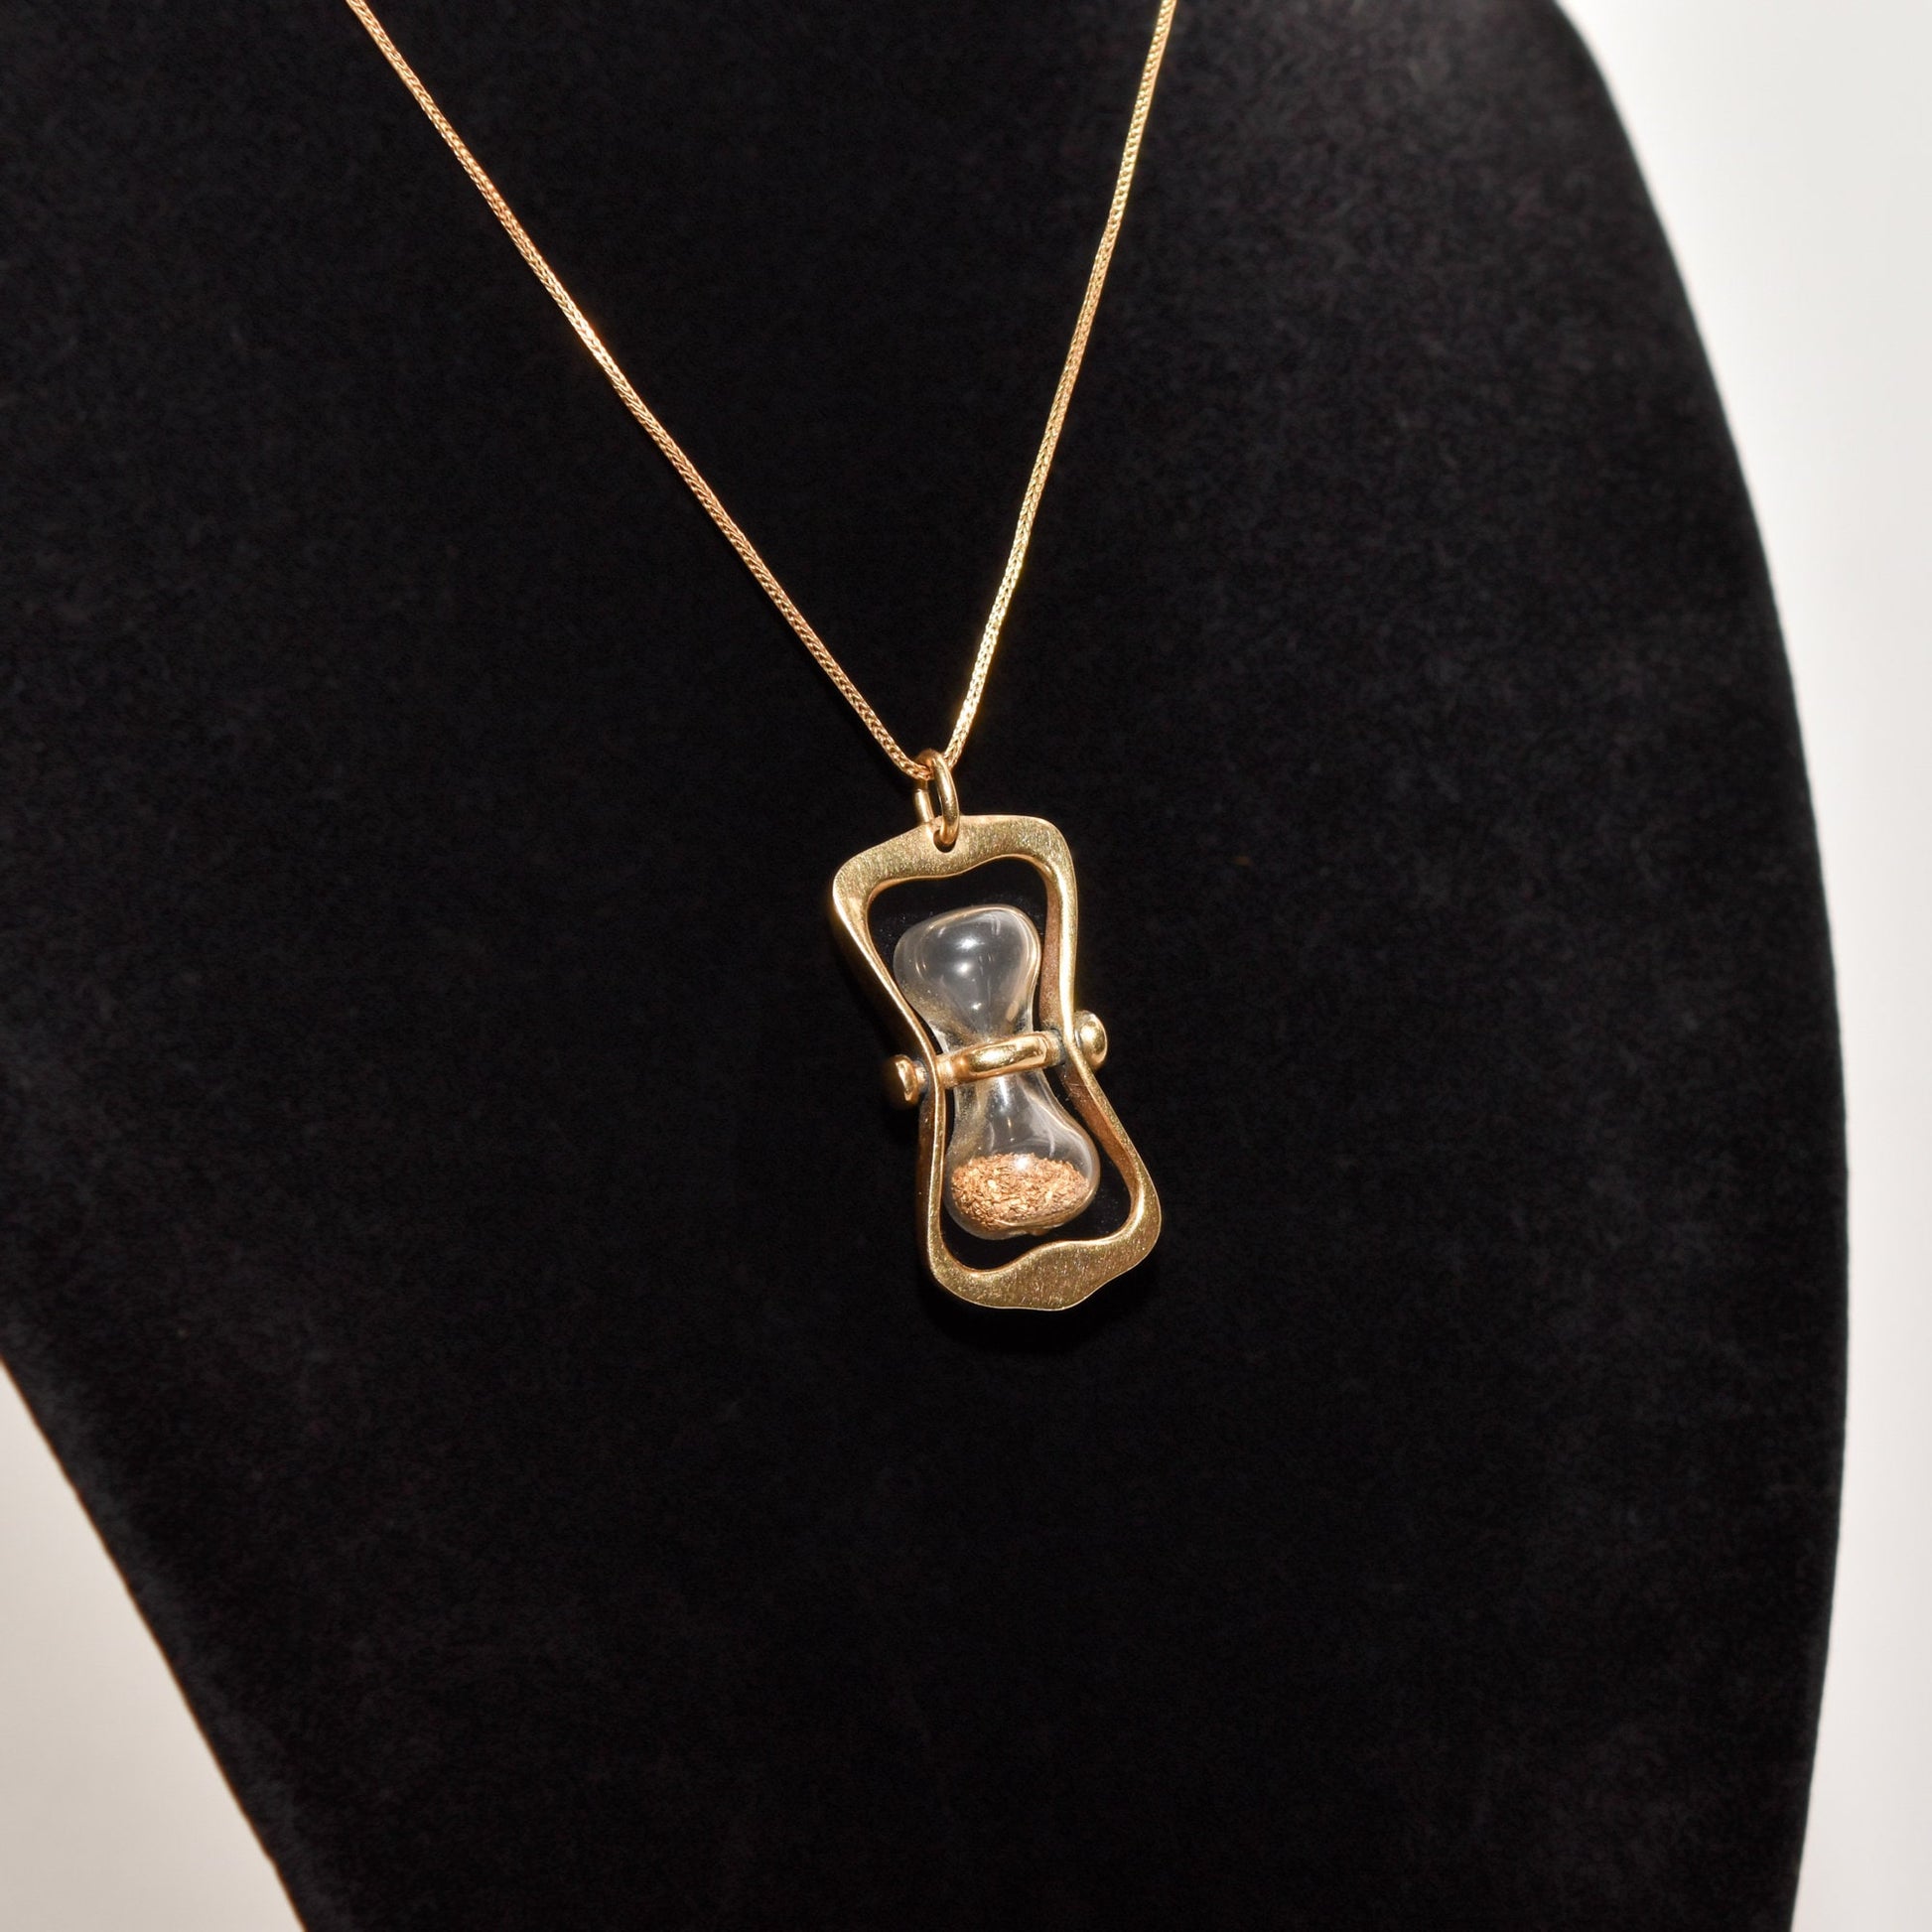 14K gold hourglass pendant with gold dust on a chain, displayed on black mannequin, 36mm movable swivel estate jewelry.